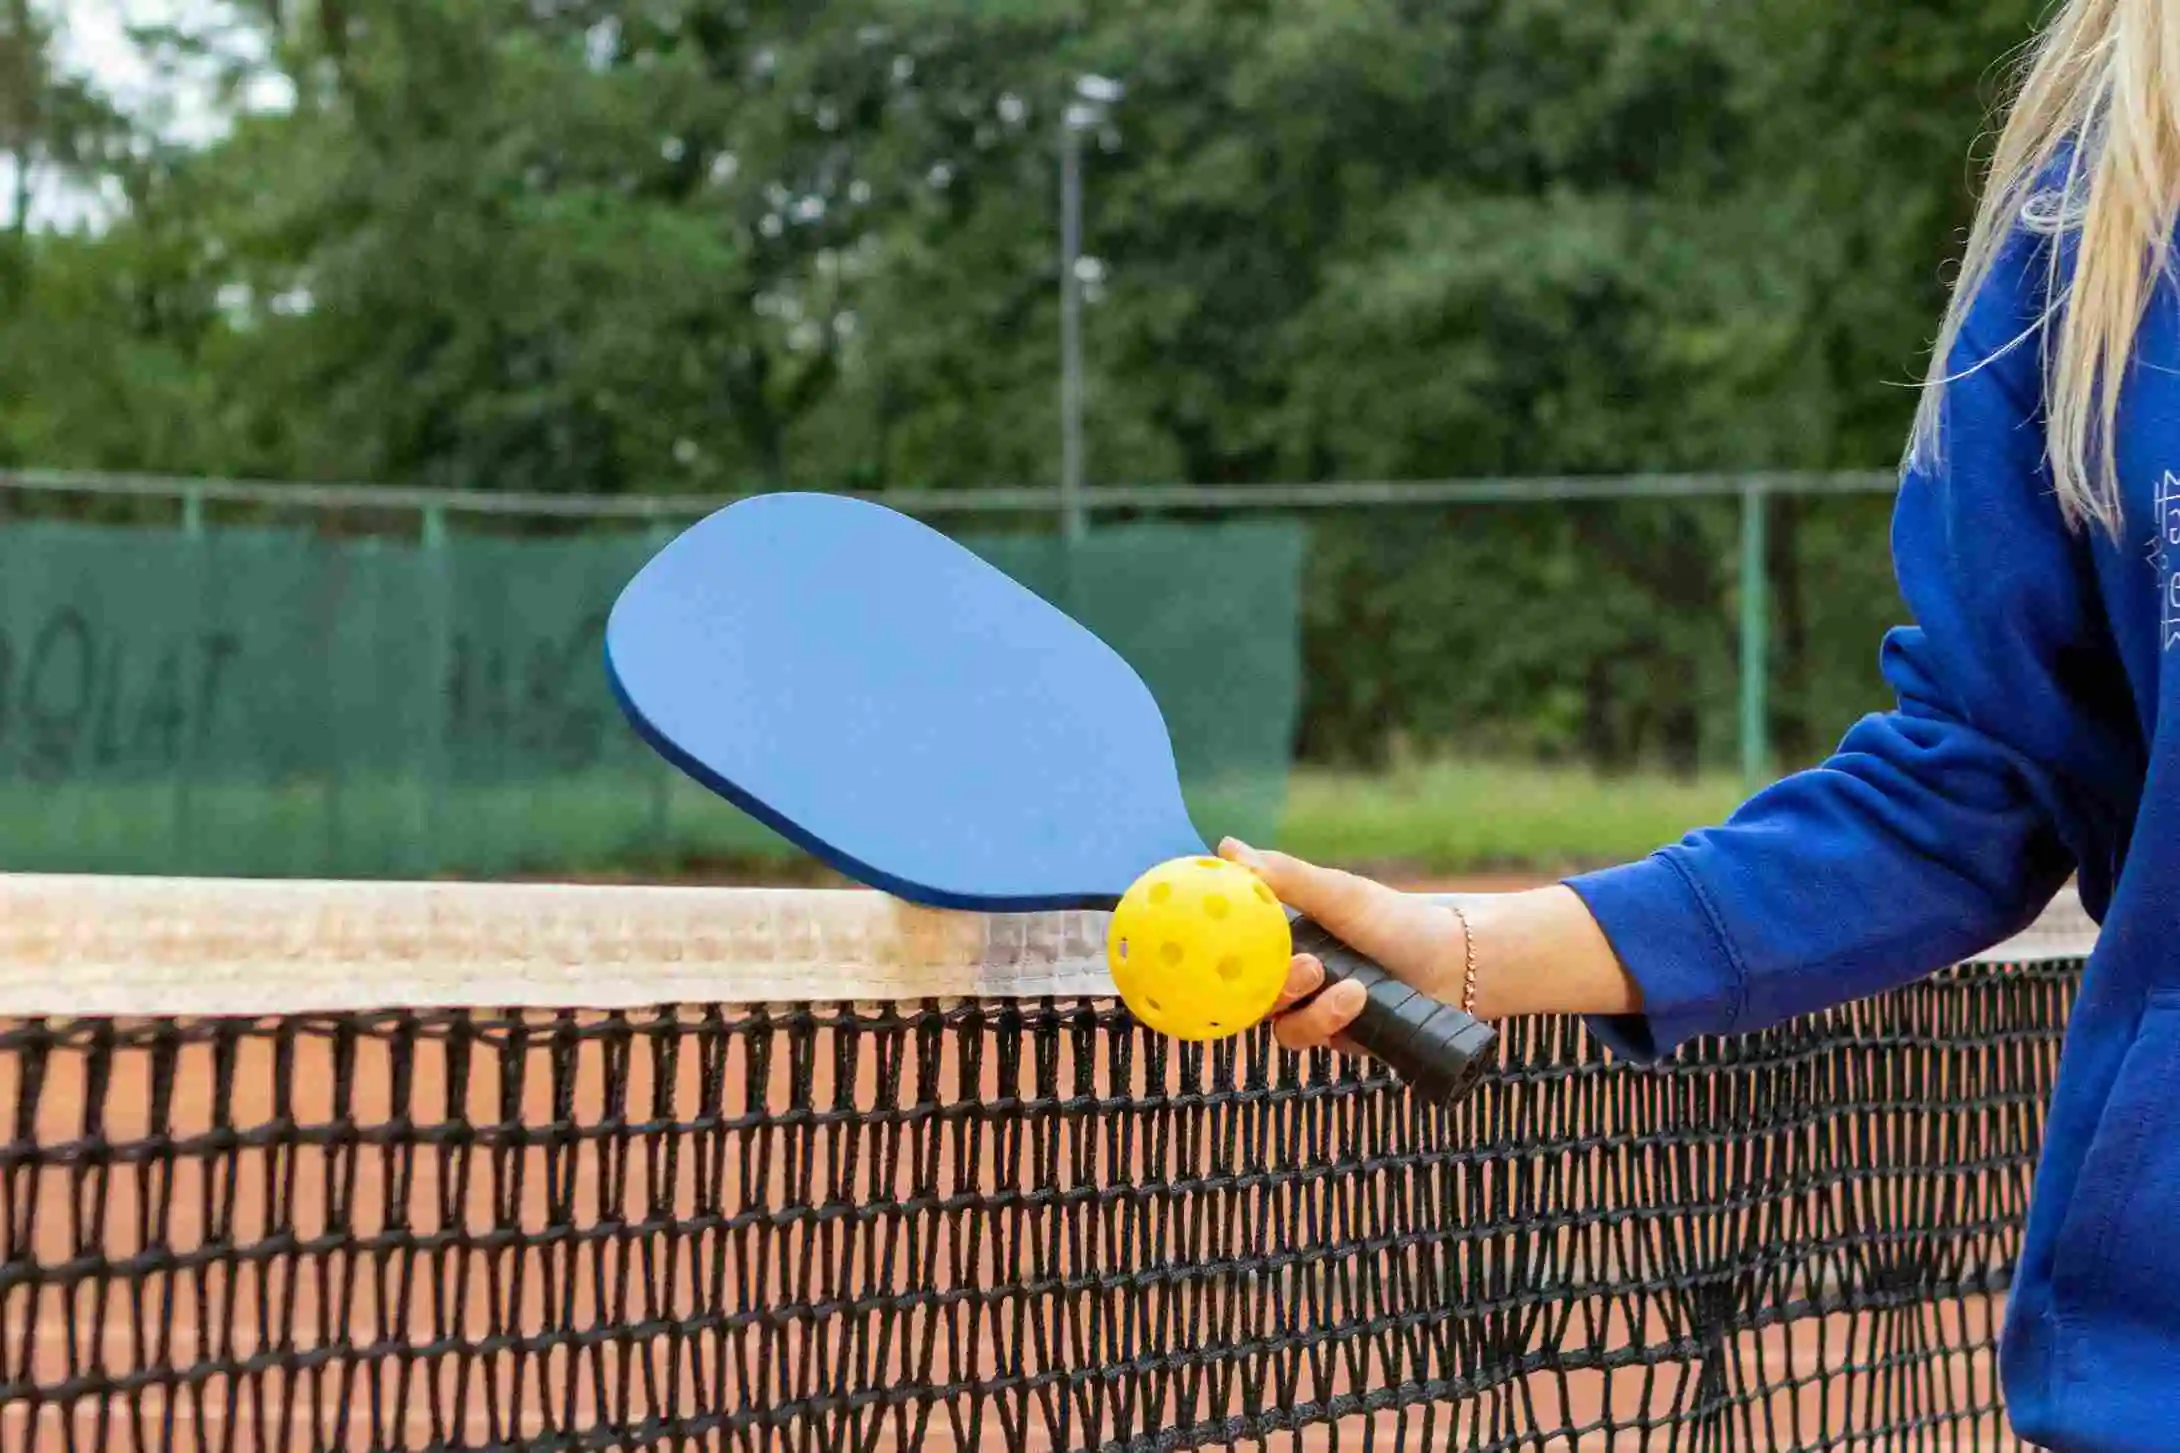 Can You Touch The Net In Pickleball- Explained